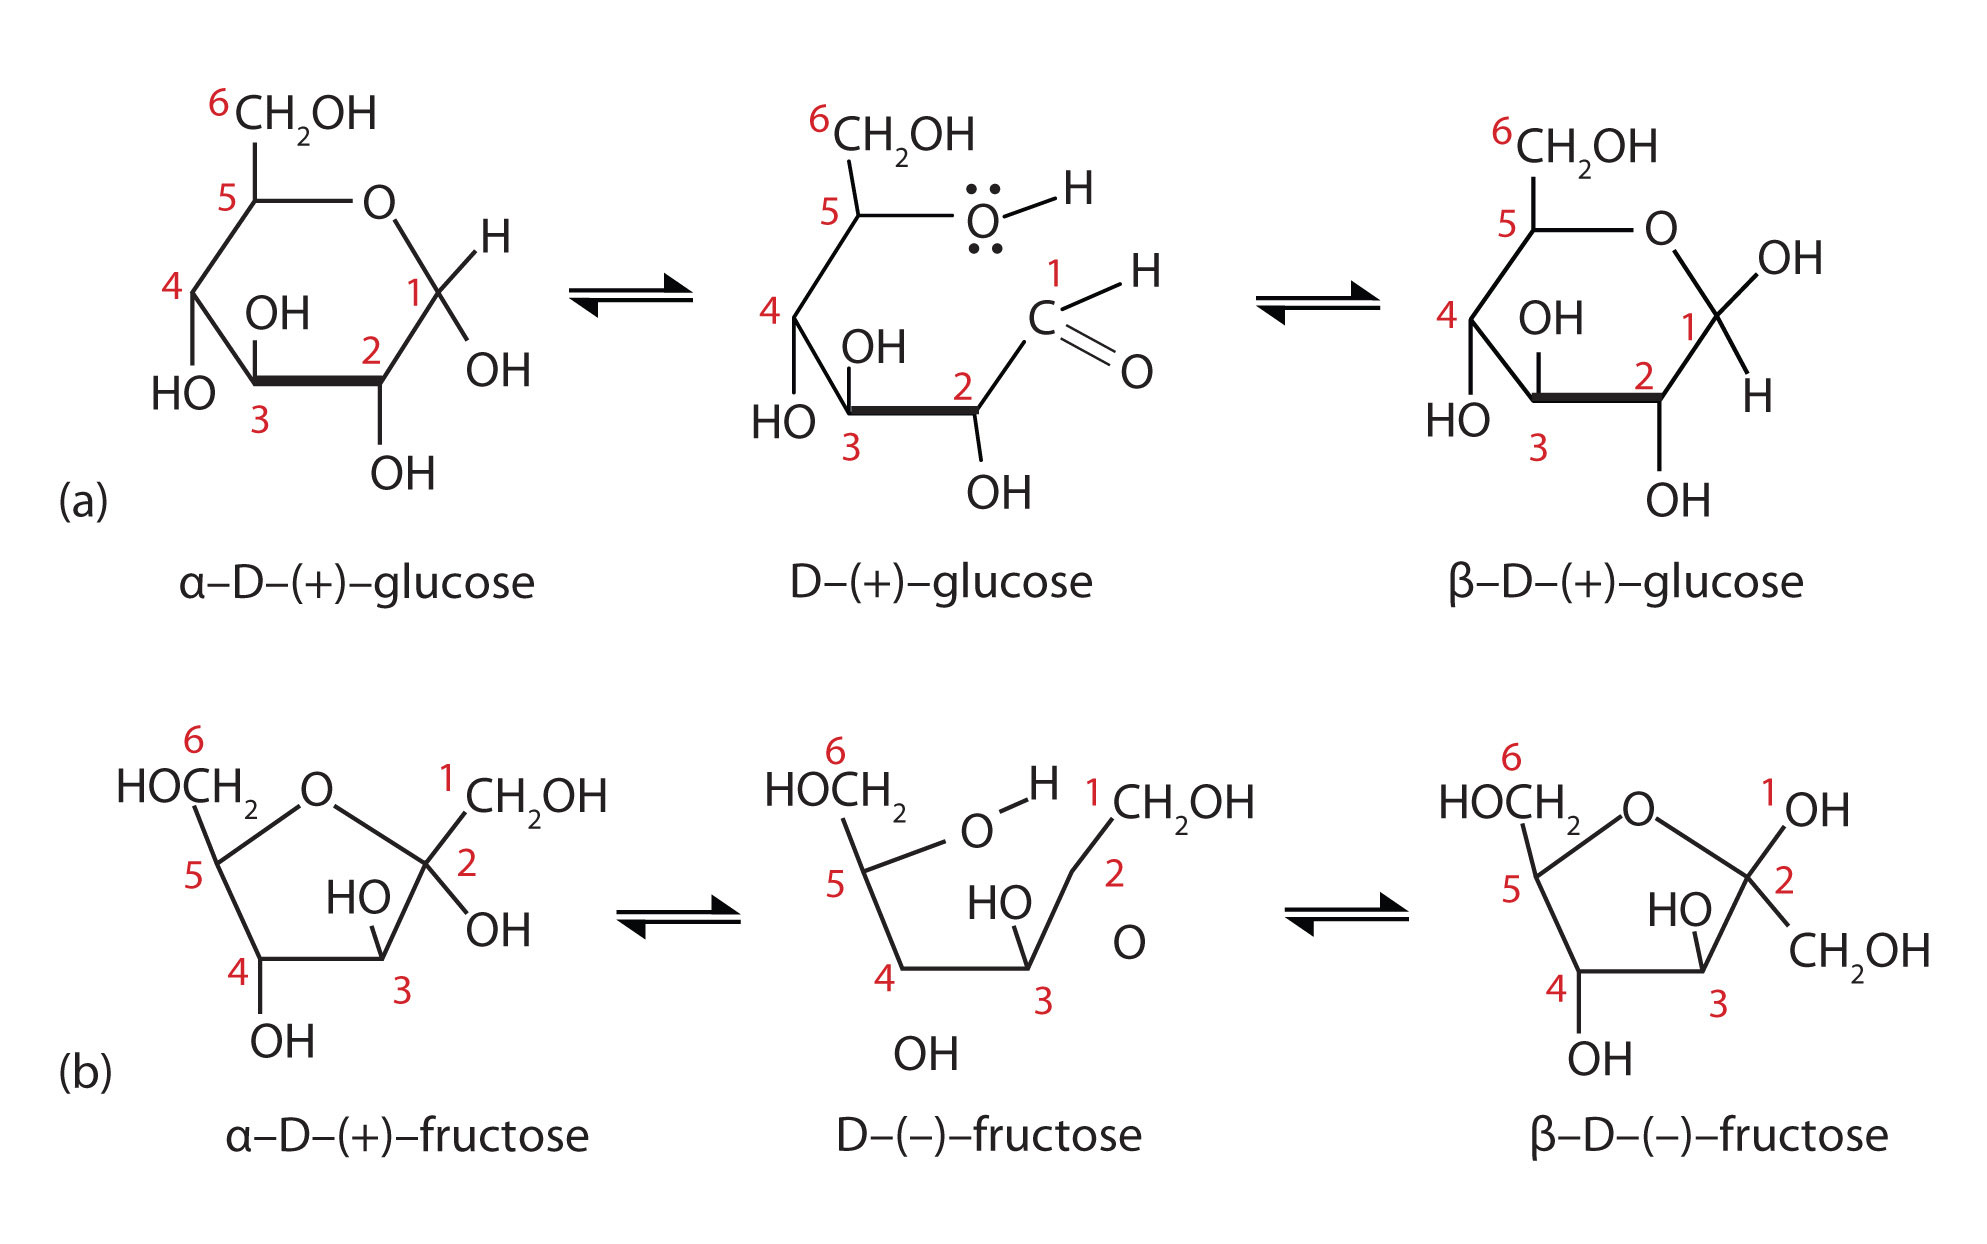 The three interconversion structures of D-glucose (a) and D-fructose (b)